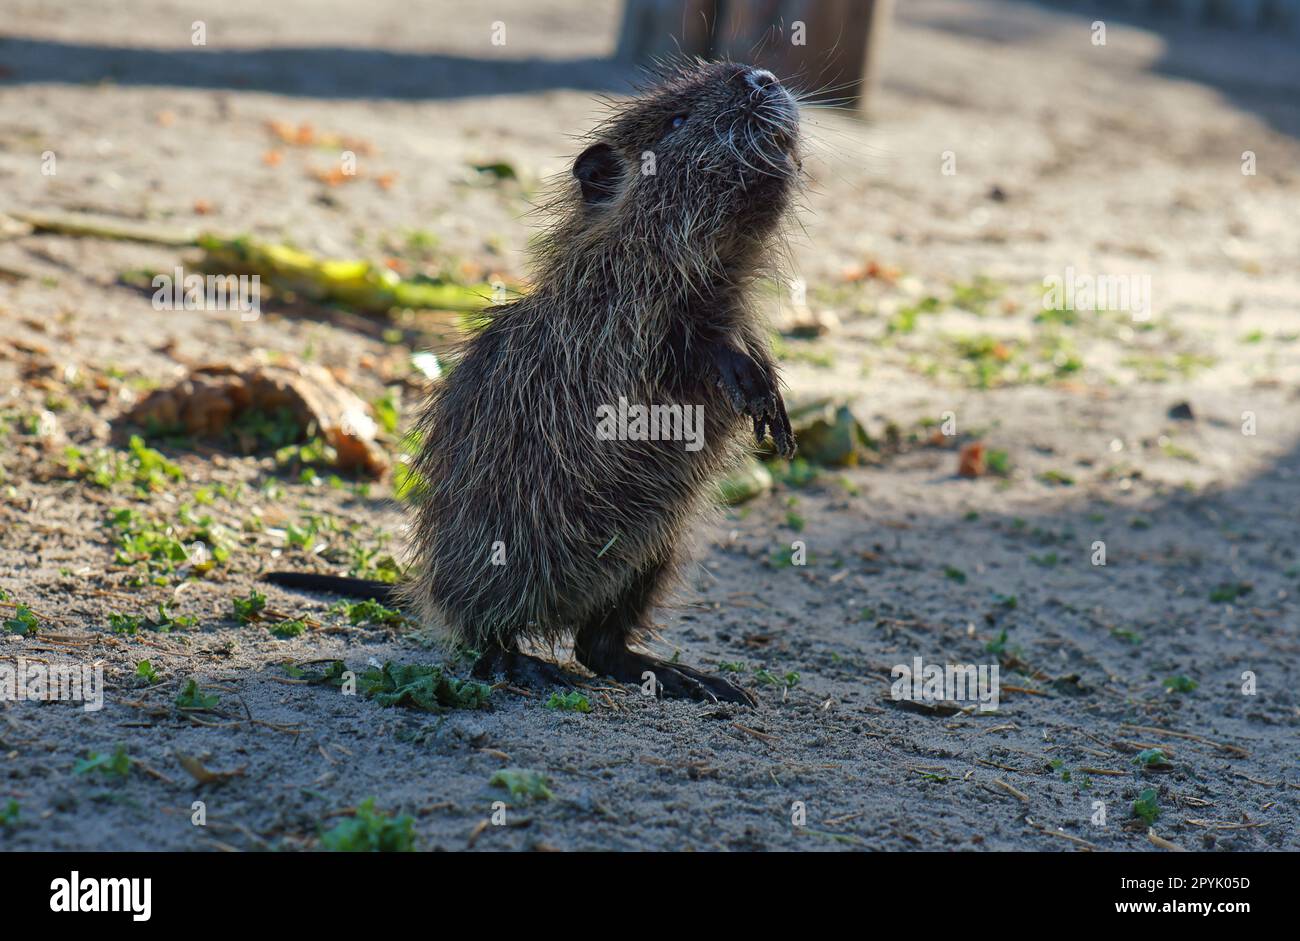 bisamrat stands on hind legs and observes the surroundings. Mammal with brown fur Stock Photo